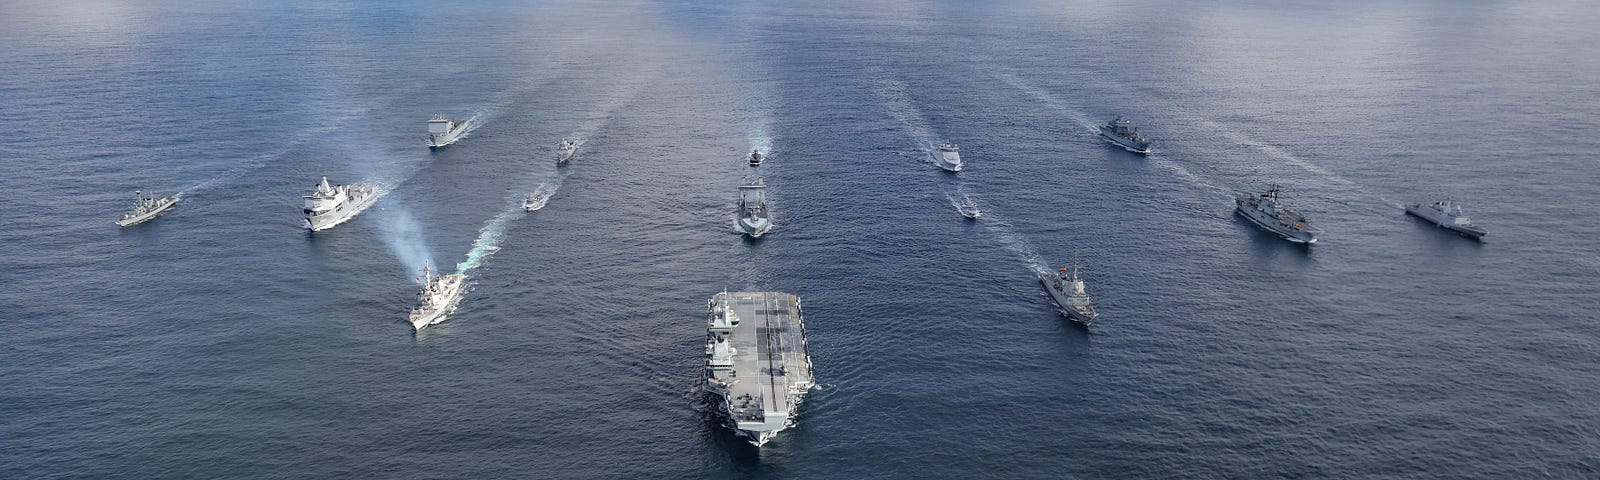 The Royal Navy aircraft carrier HMS Prince of Wales leads a fifteen-ship formation of ships from the United Kingdom Carrier Strike Group and the NATO Amphibious Task Group during Exercise Nordic Response 24 in the Norwegian Sea, March 11, 2024. Photo by Belinda Alker/Royal Navy